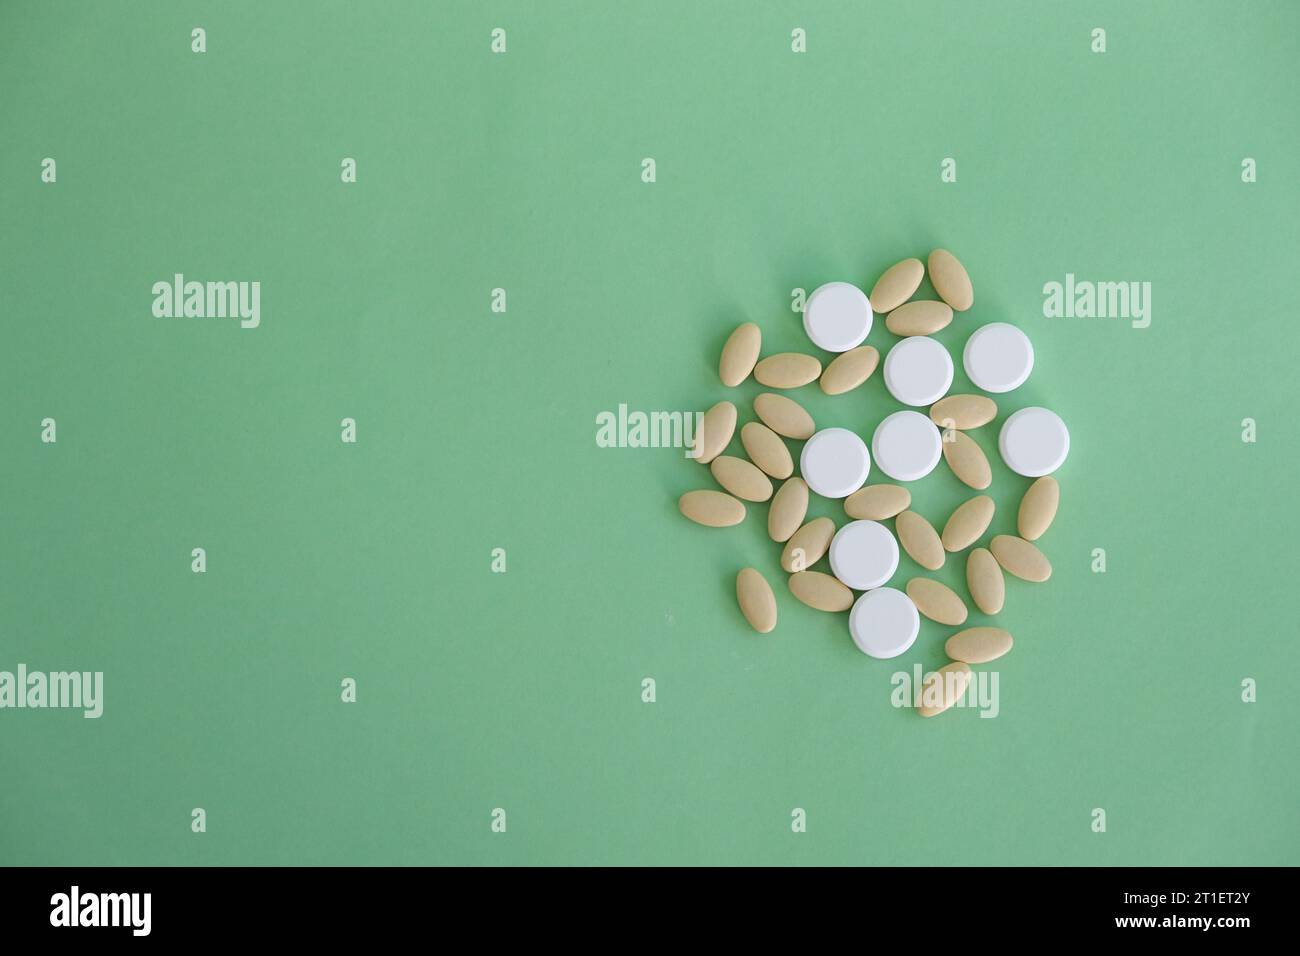 Close up top view heap of pills vitamin supplement on green background. Medical health care pharmacy concept background. Open space area. Stock Photo